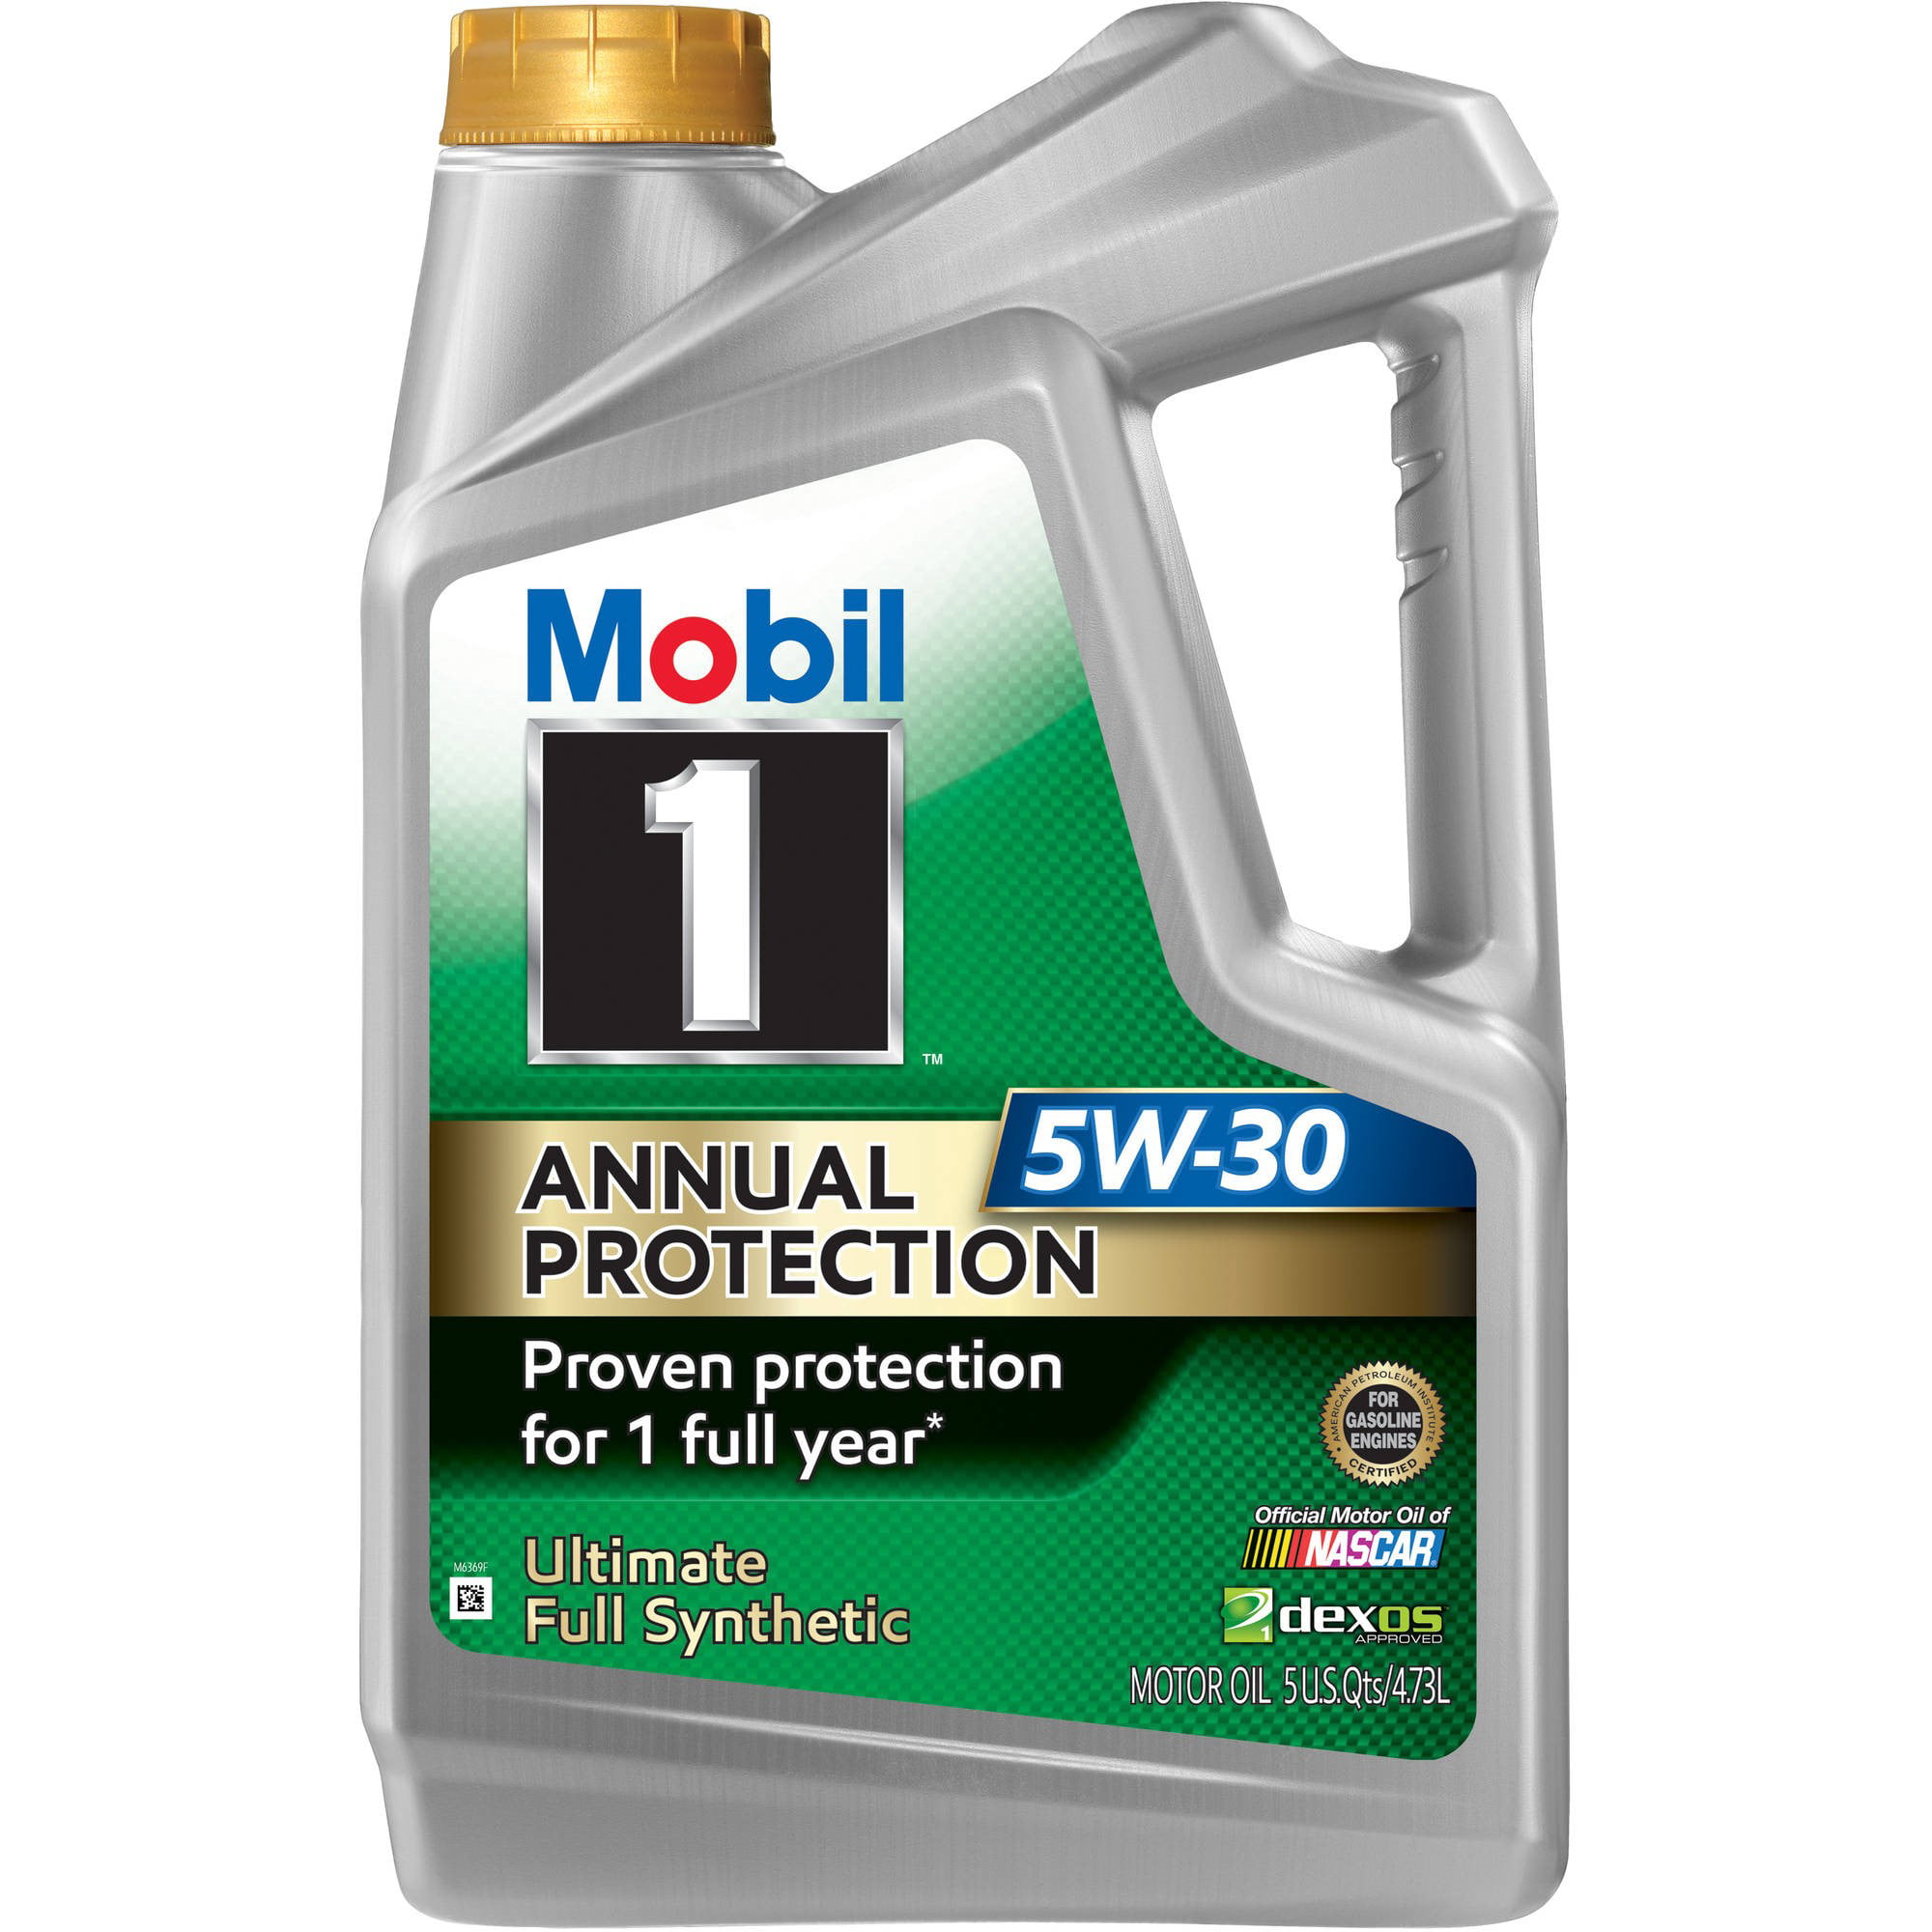 mobil-1-annual-protection-synthetic-motor-oil-5w-30-5-qt-walmart